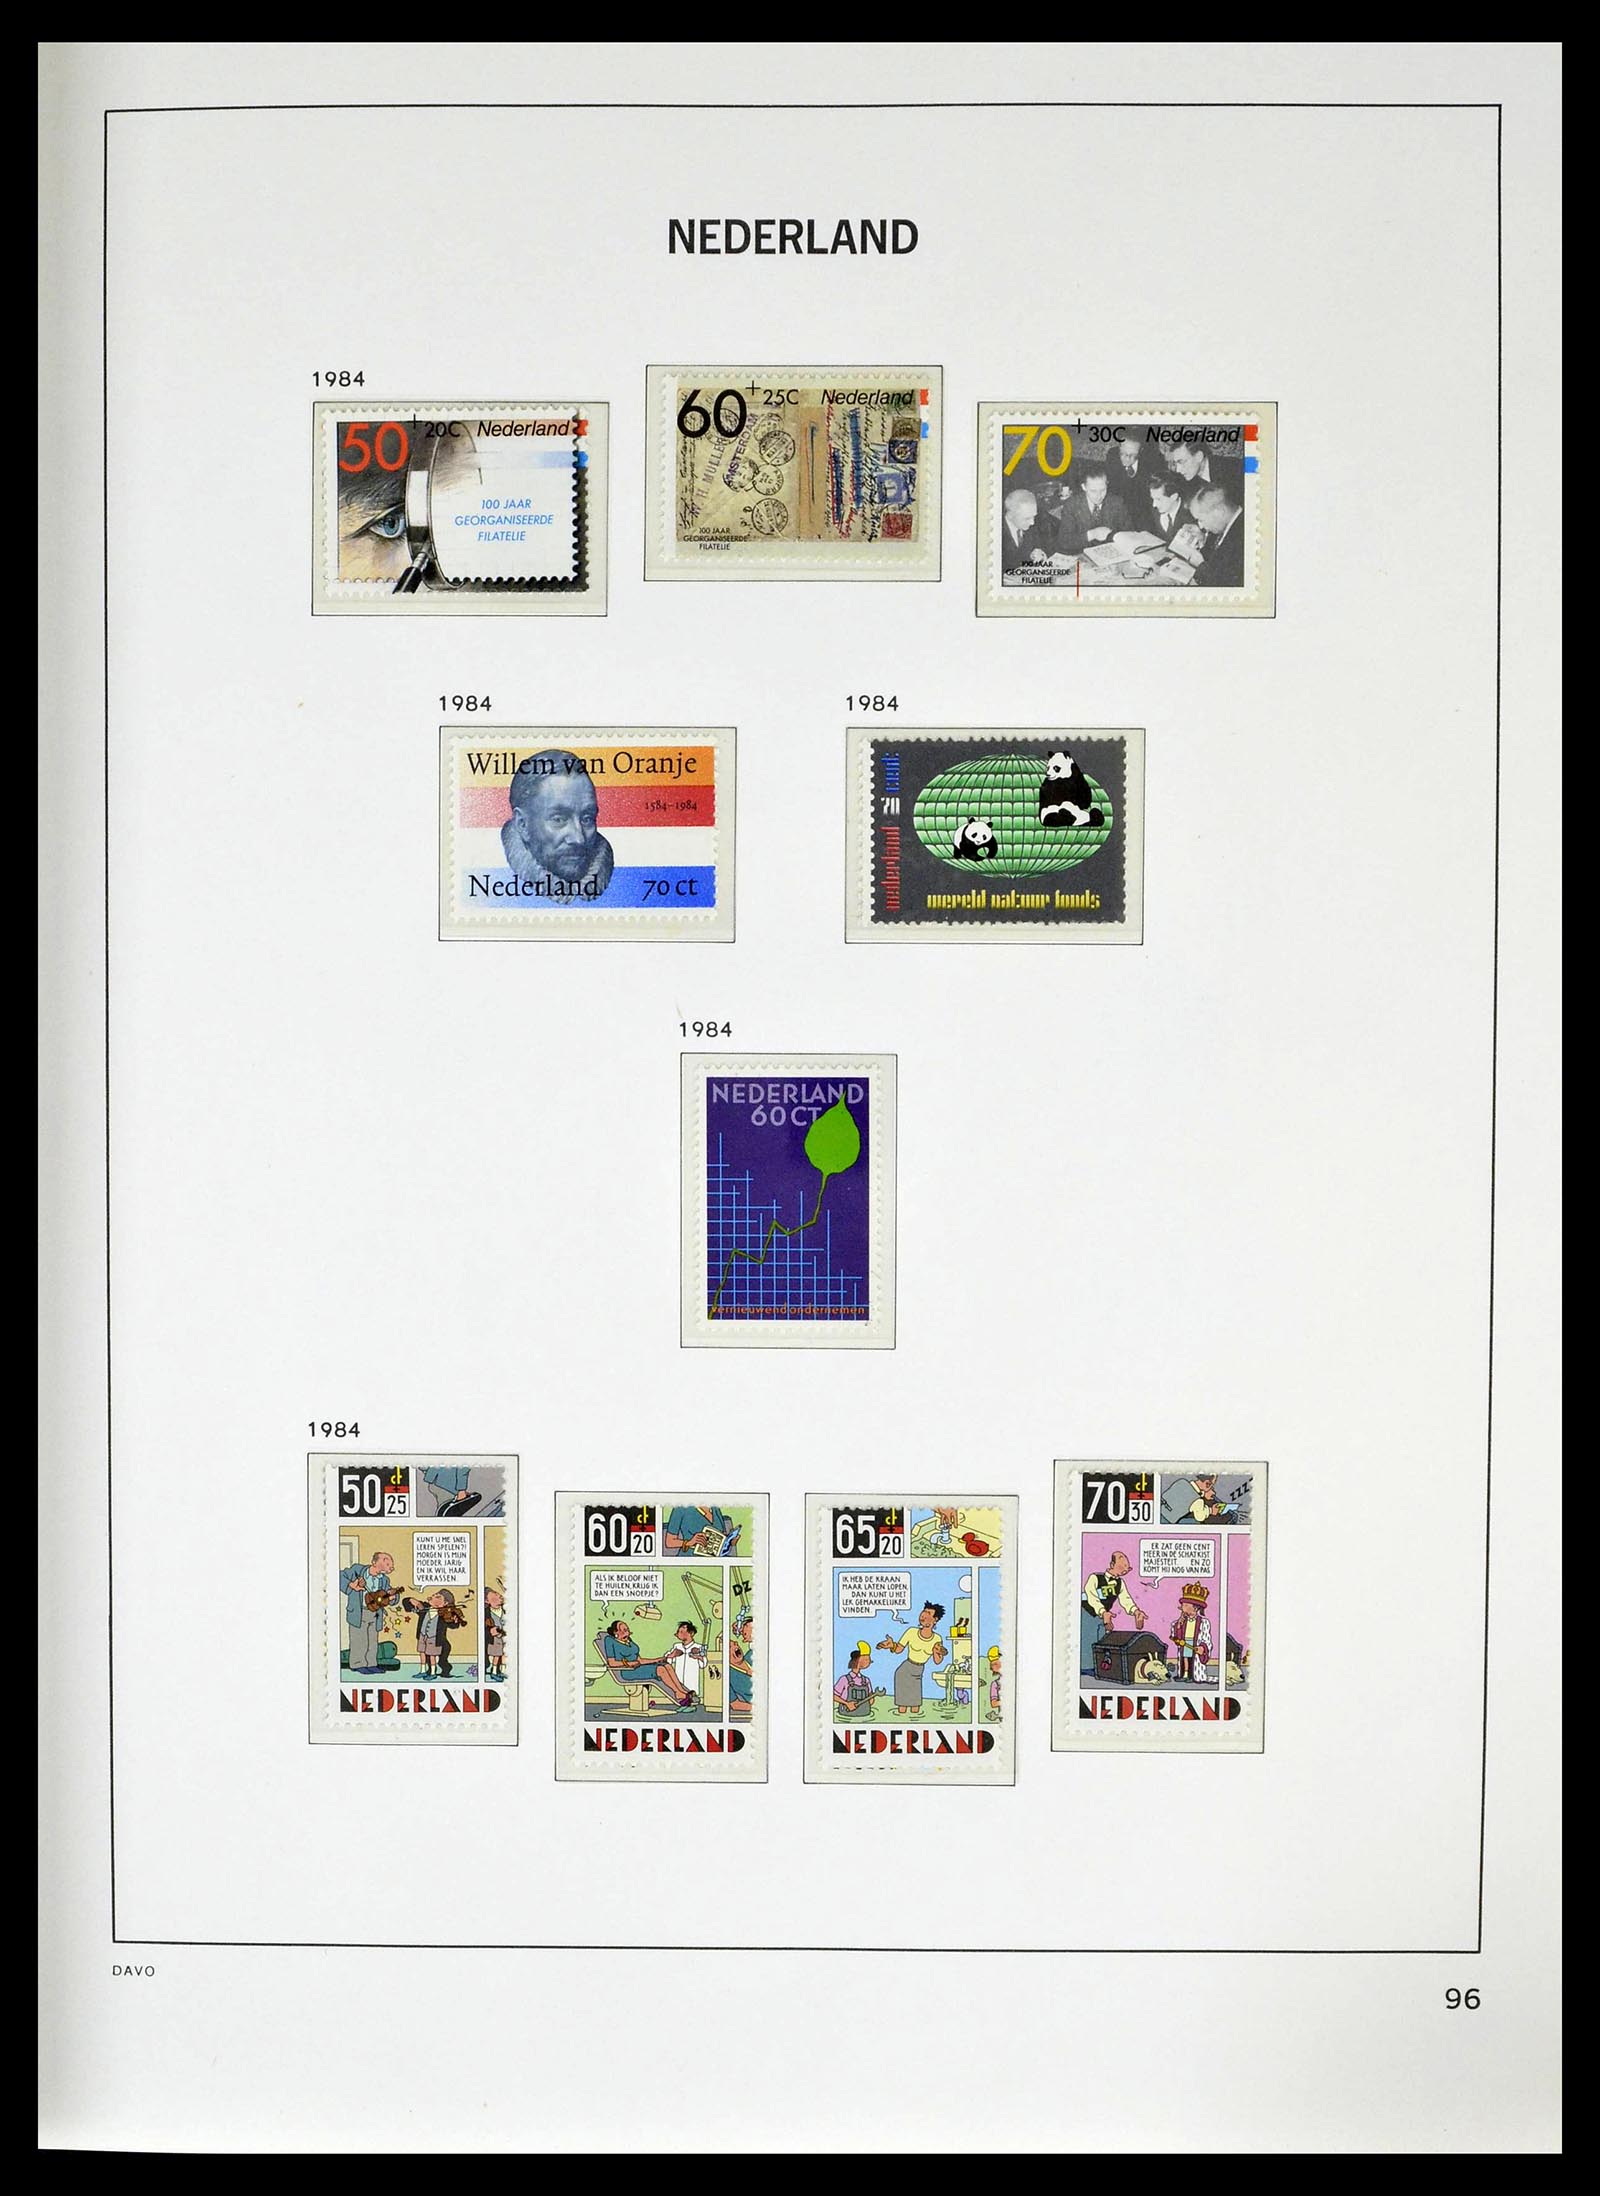 39136 0025 - Stamp collection 39136 Netherlands 1975-2020!